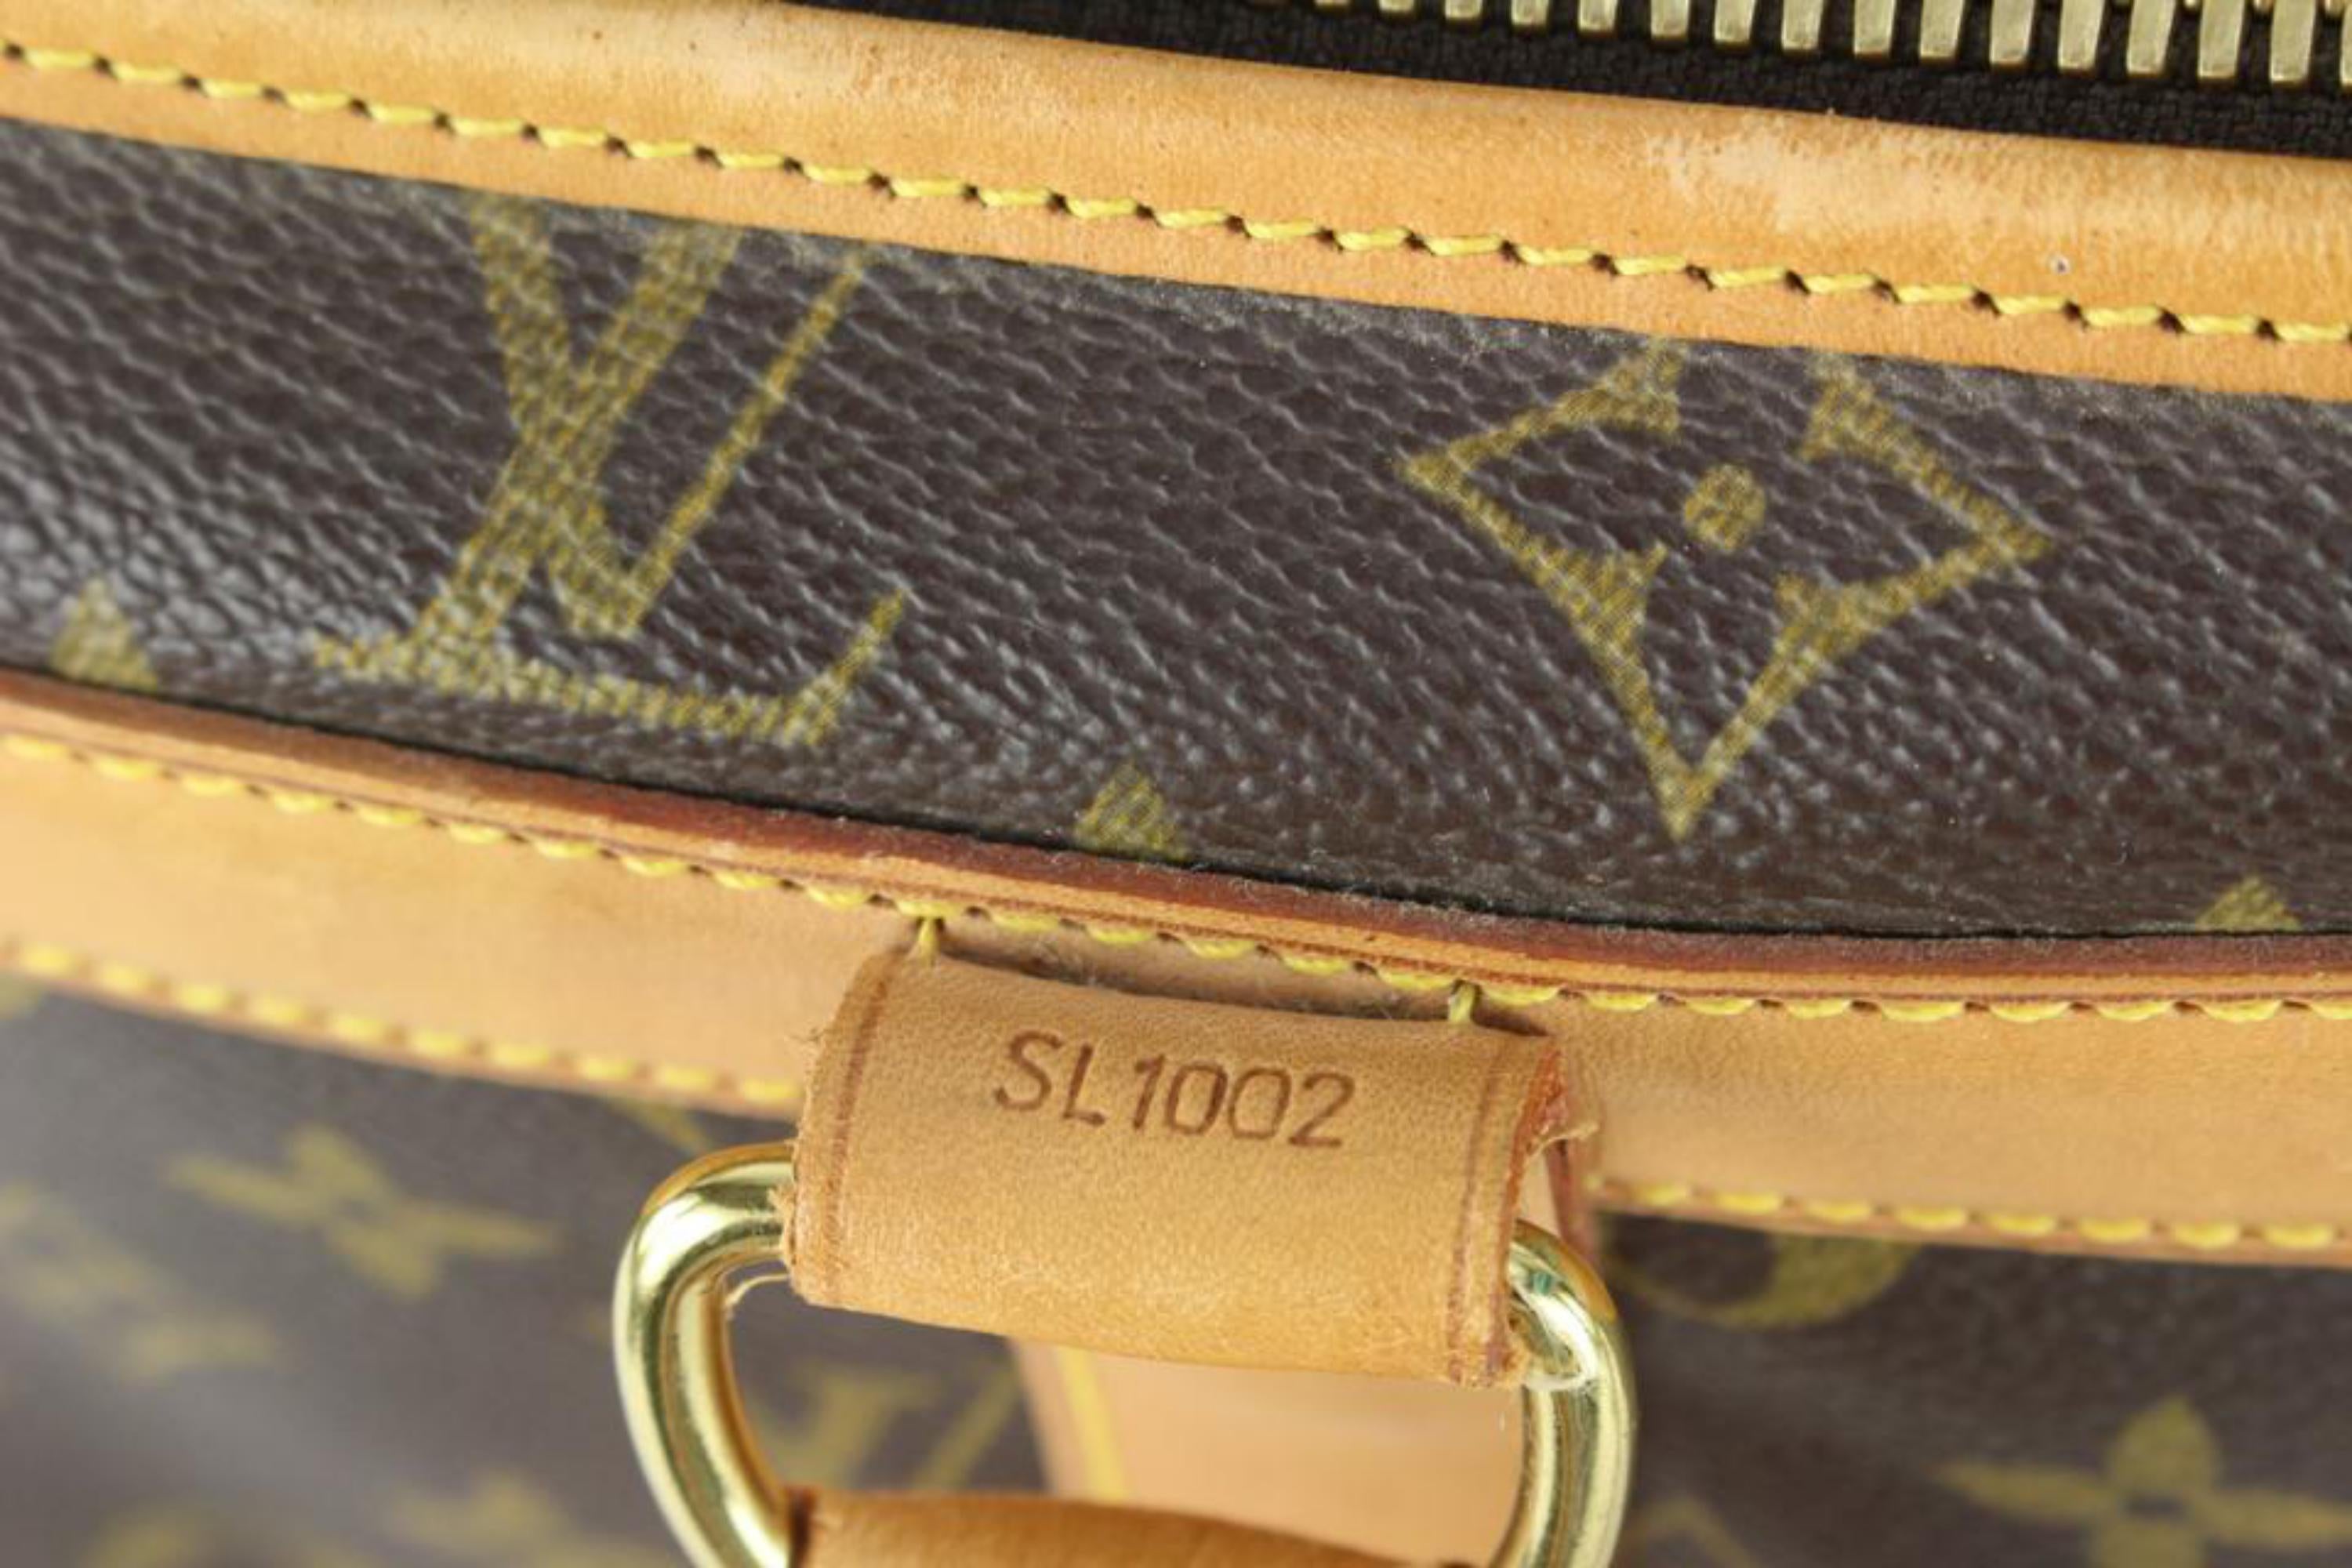 LOUIS VUITTON Dog Carrier 50 - More Than You Can Imagine